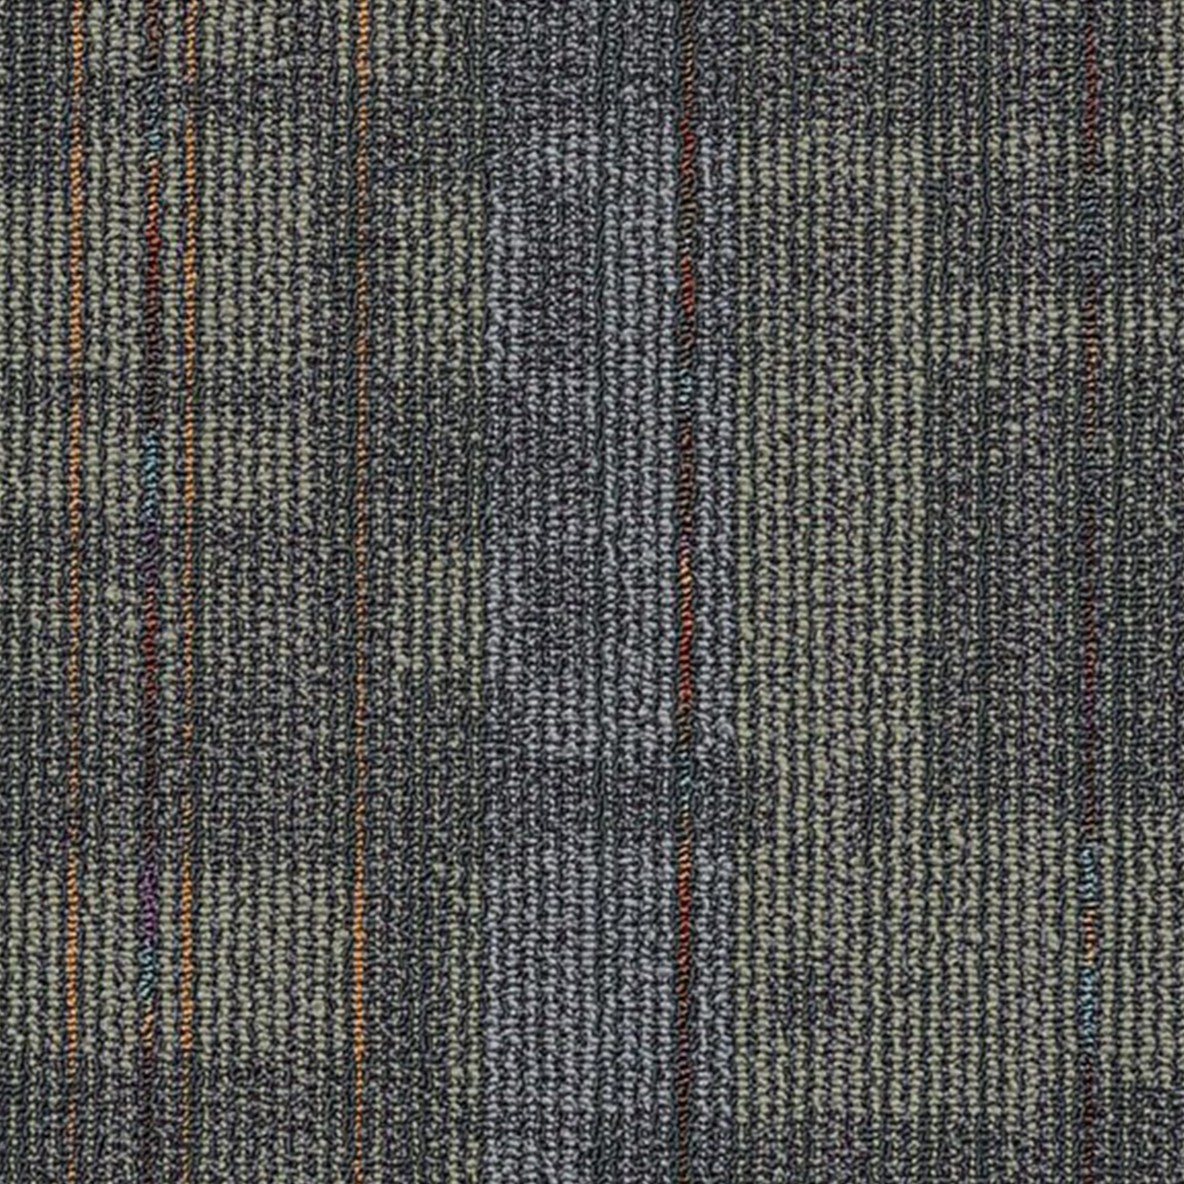 Out of Bounds Commercial Carpet Tile .25 Inch x 2x2 Ft. 13 per Carton Synthesize color close up